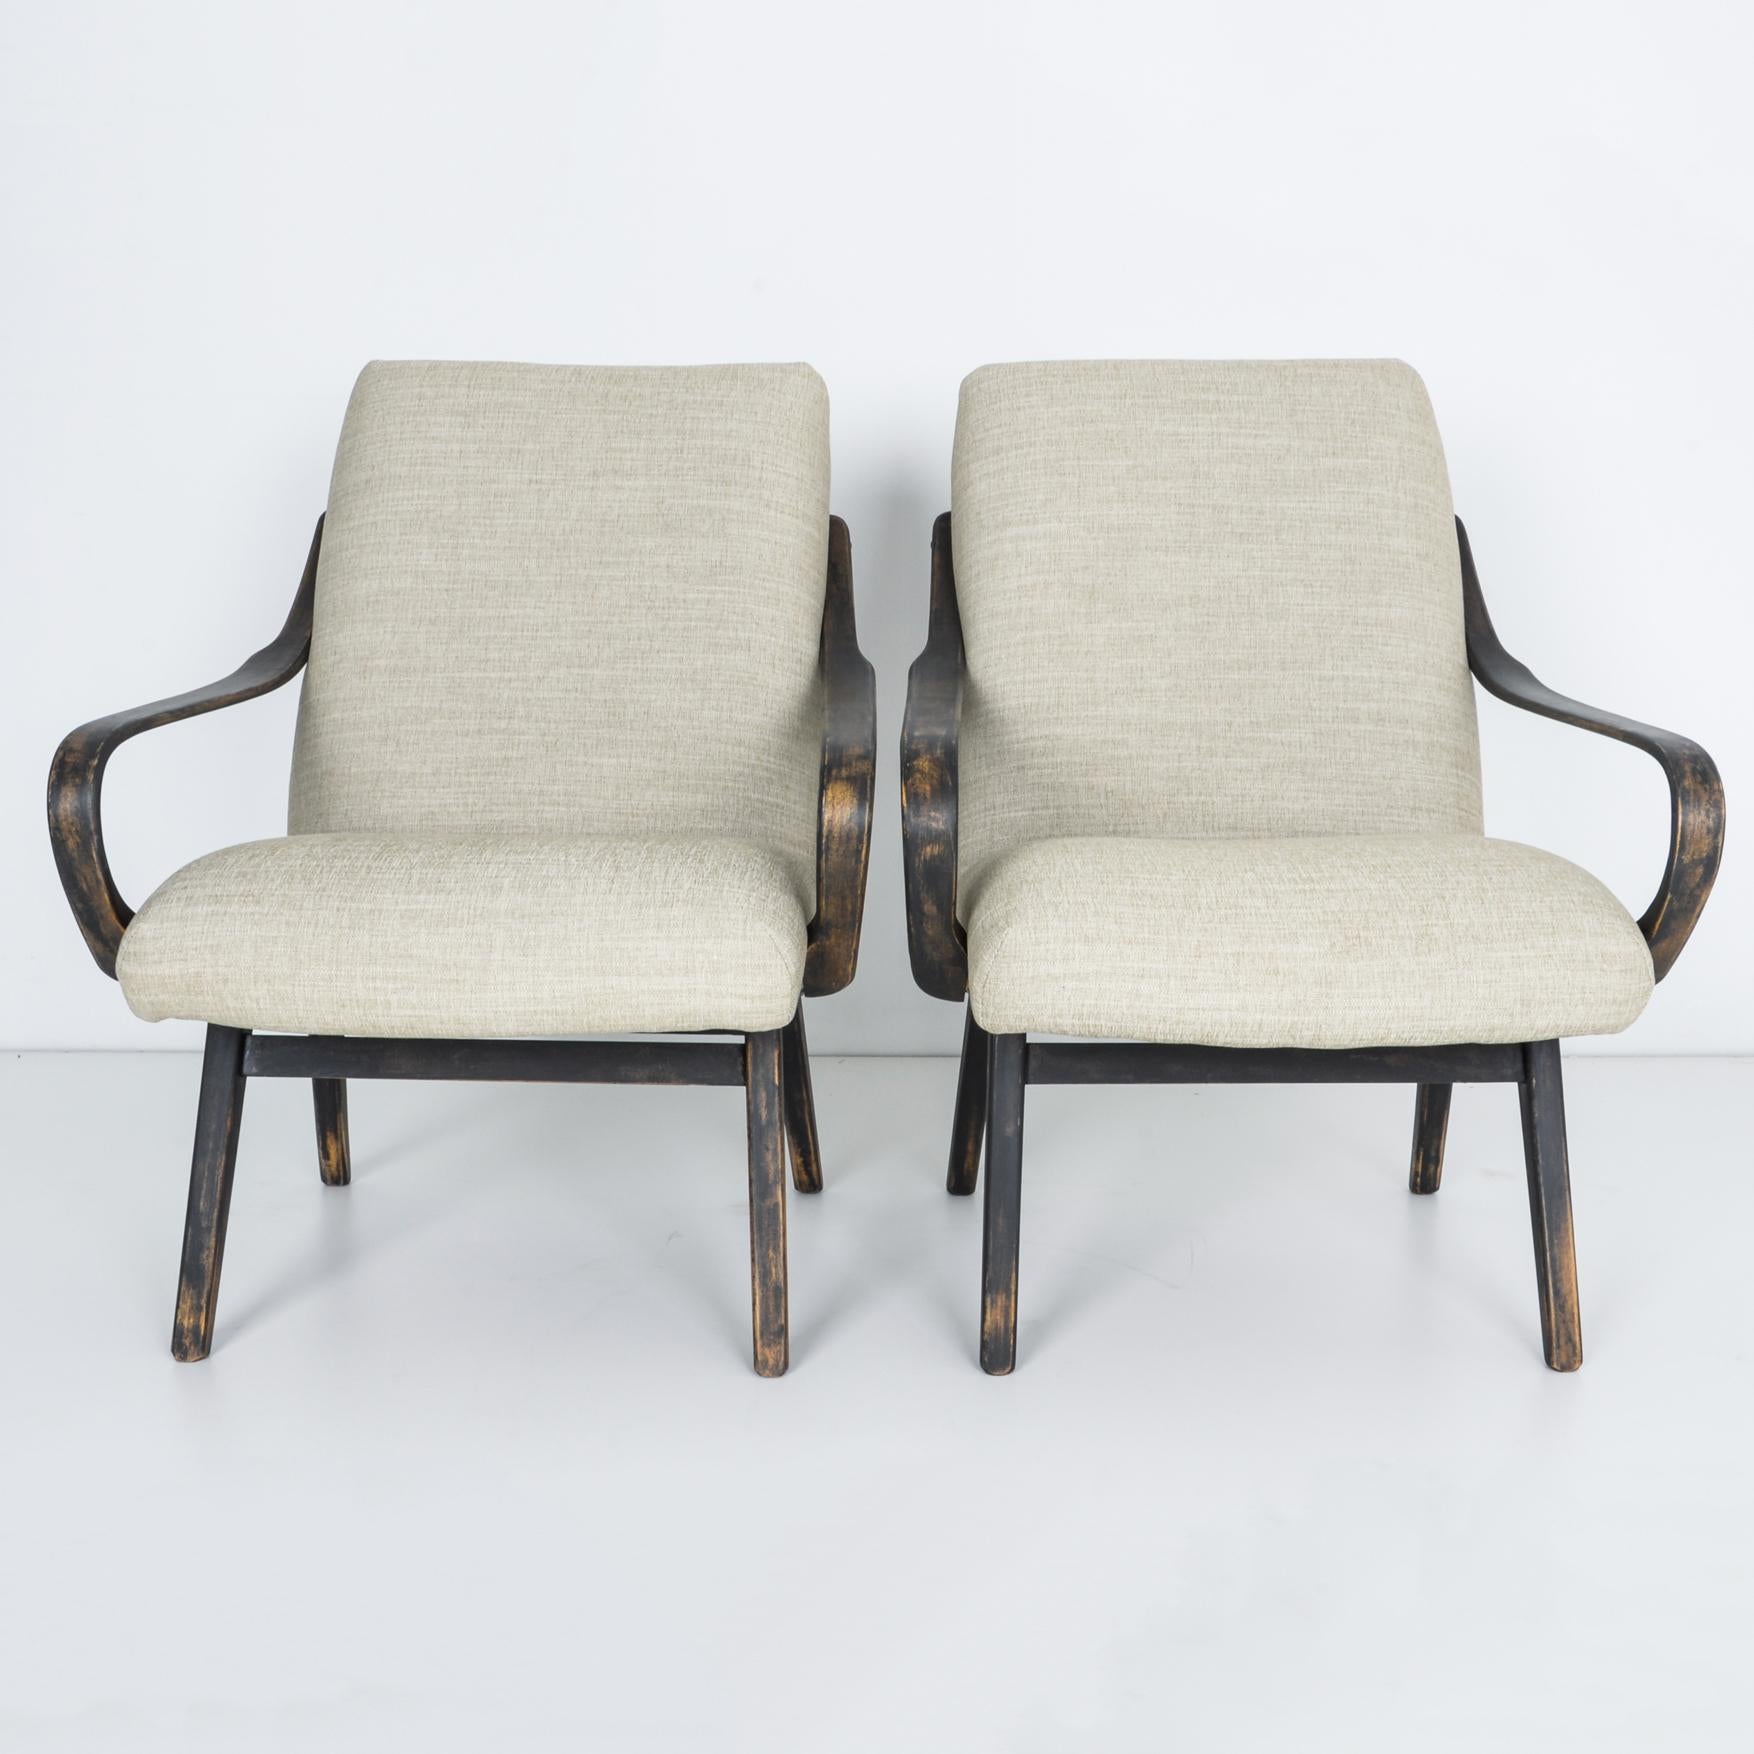 From Czech Republic circa 1950 a comfortable and stylish pair of upholstered armchairs. Made from updated rich fabric, bent arms and hardwood braces. These chairs package comfort in quality style, with a patinated finish and updated upholstery.